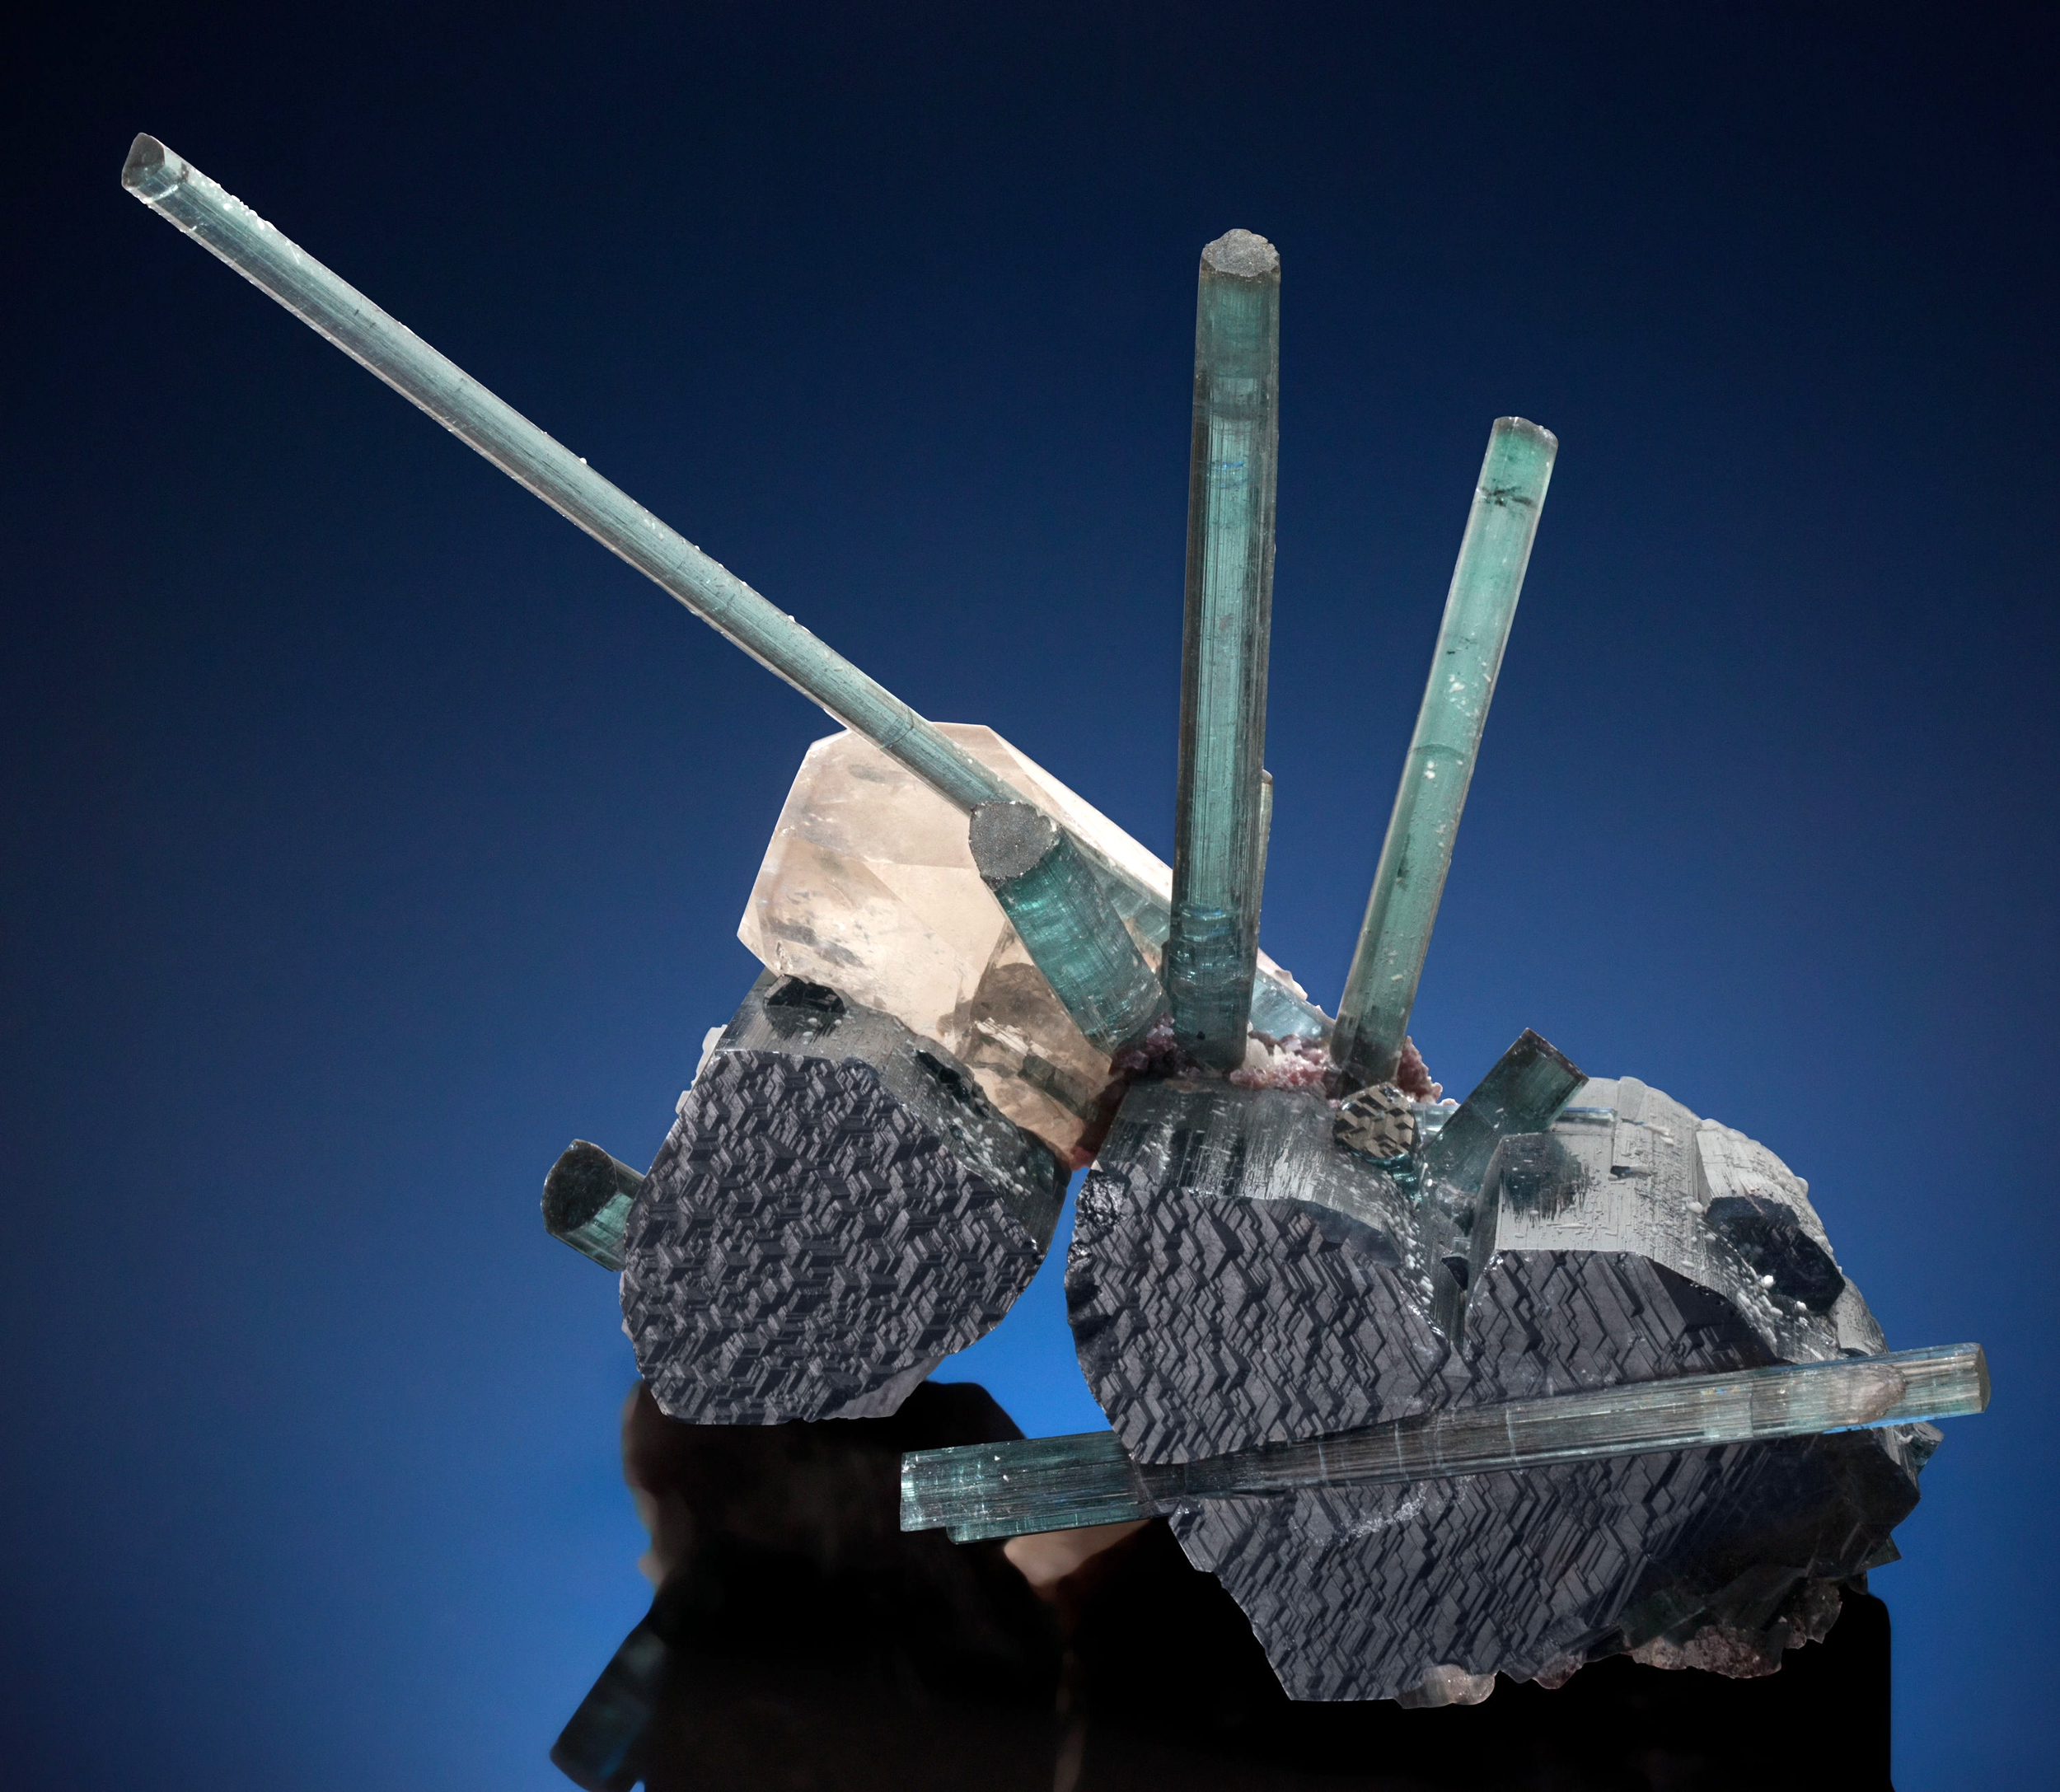 The amazing ‘Blue on Blue’ tourmaline on tourmaline with quartz from the Porcupine Pocket of the Pederneira Mine, Brazil has an estimate of $500,000-$700,000. Heritage Auctions images